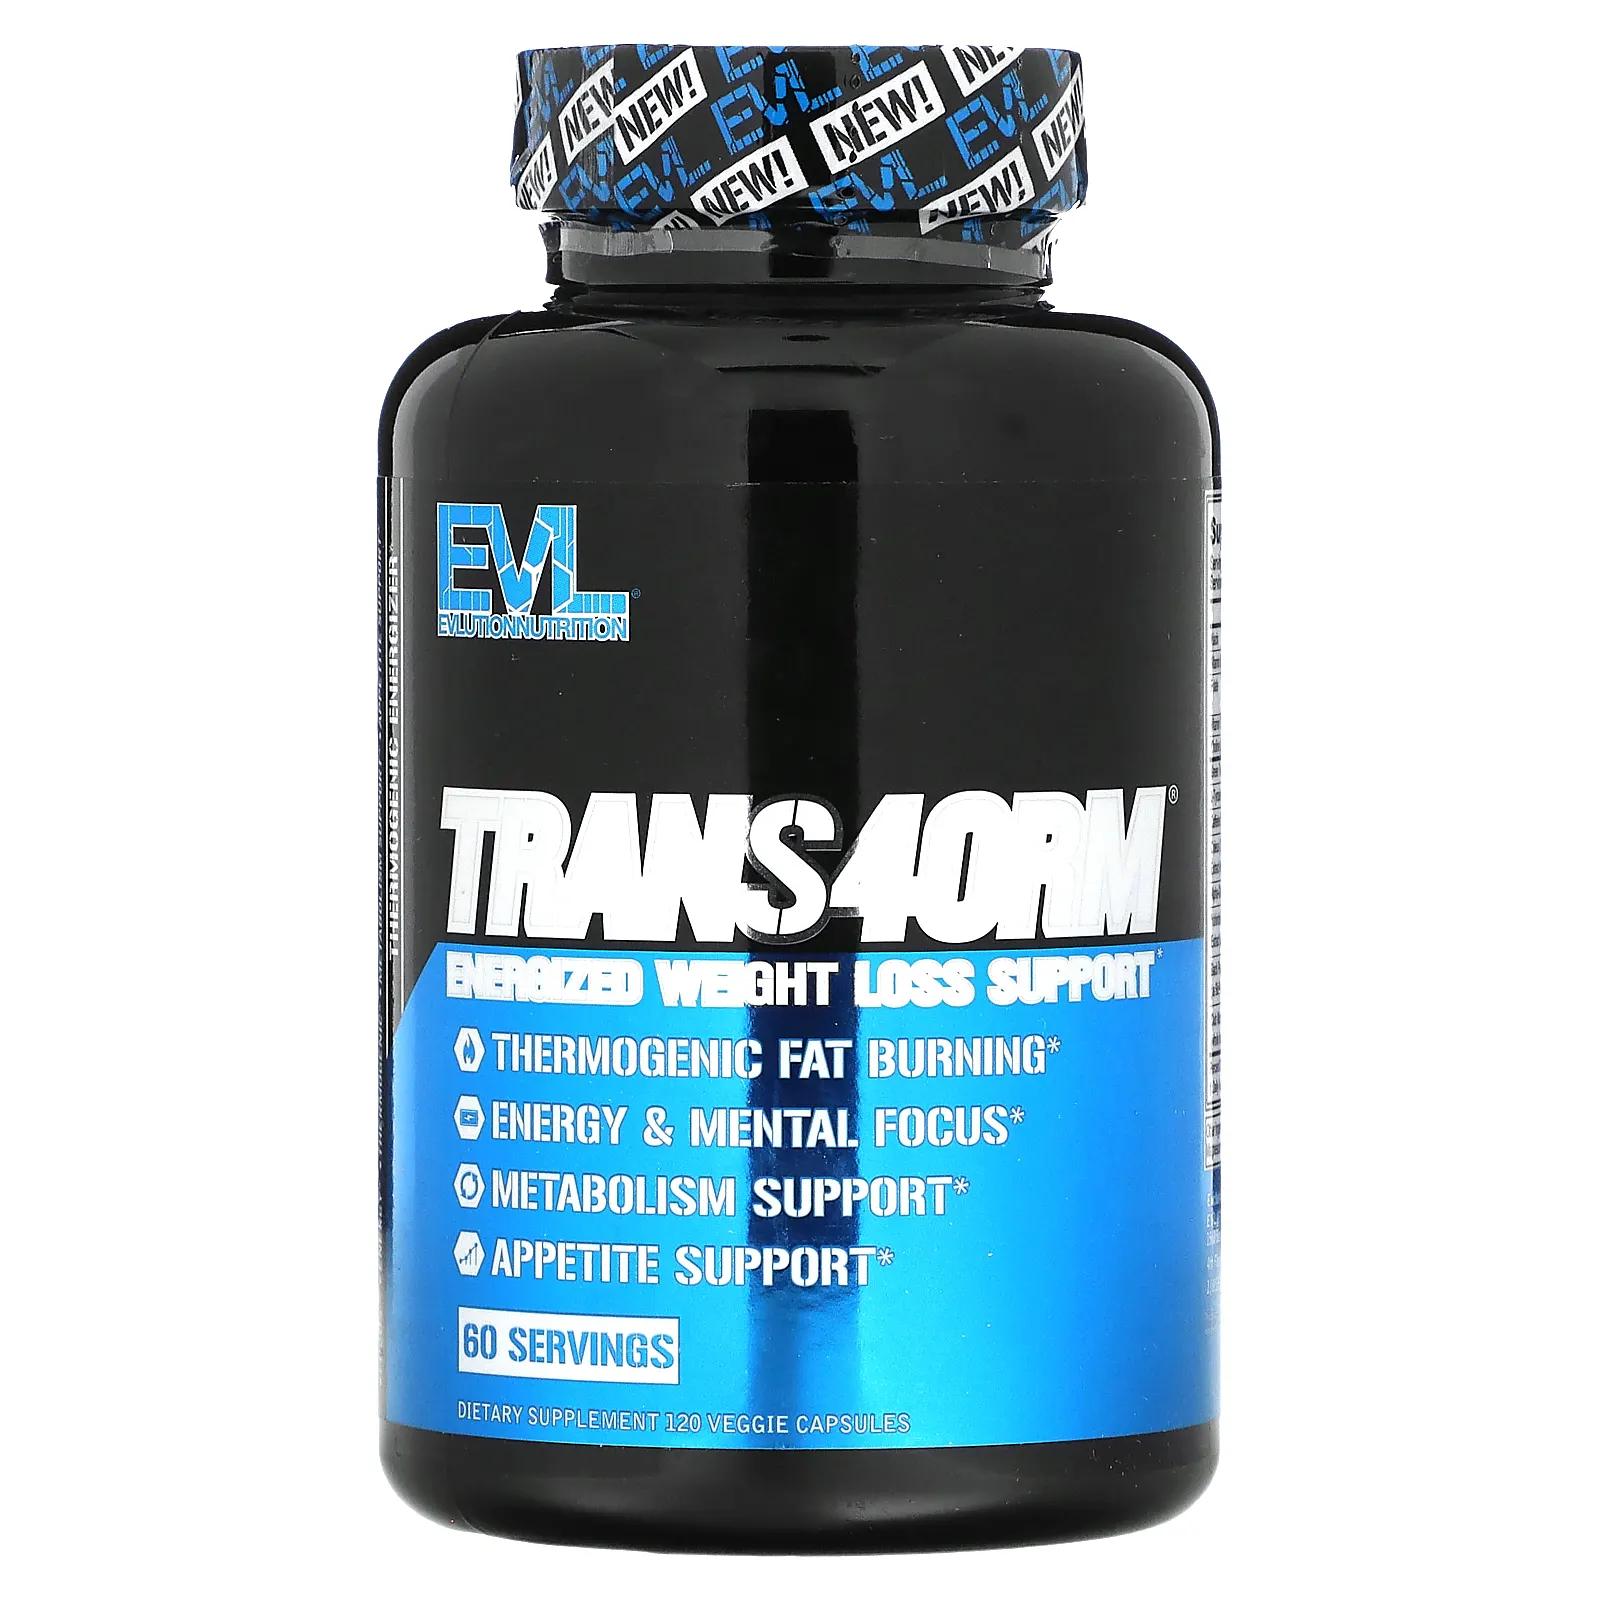 EVLution Nutrition Trans4orm Thermogenic Energizing Fat Burner Supplement 120 Capsules evlution nutrition stacked greens raw superfood яблочный сад 162 г 5 7 унции